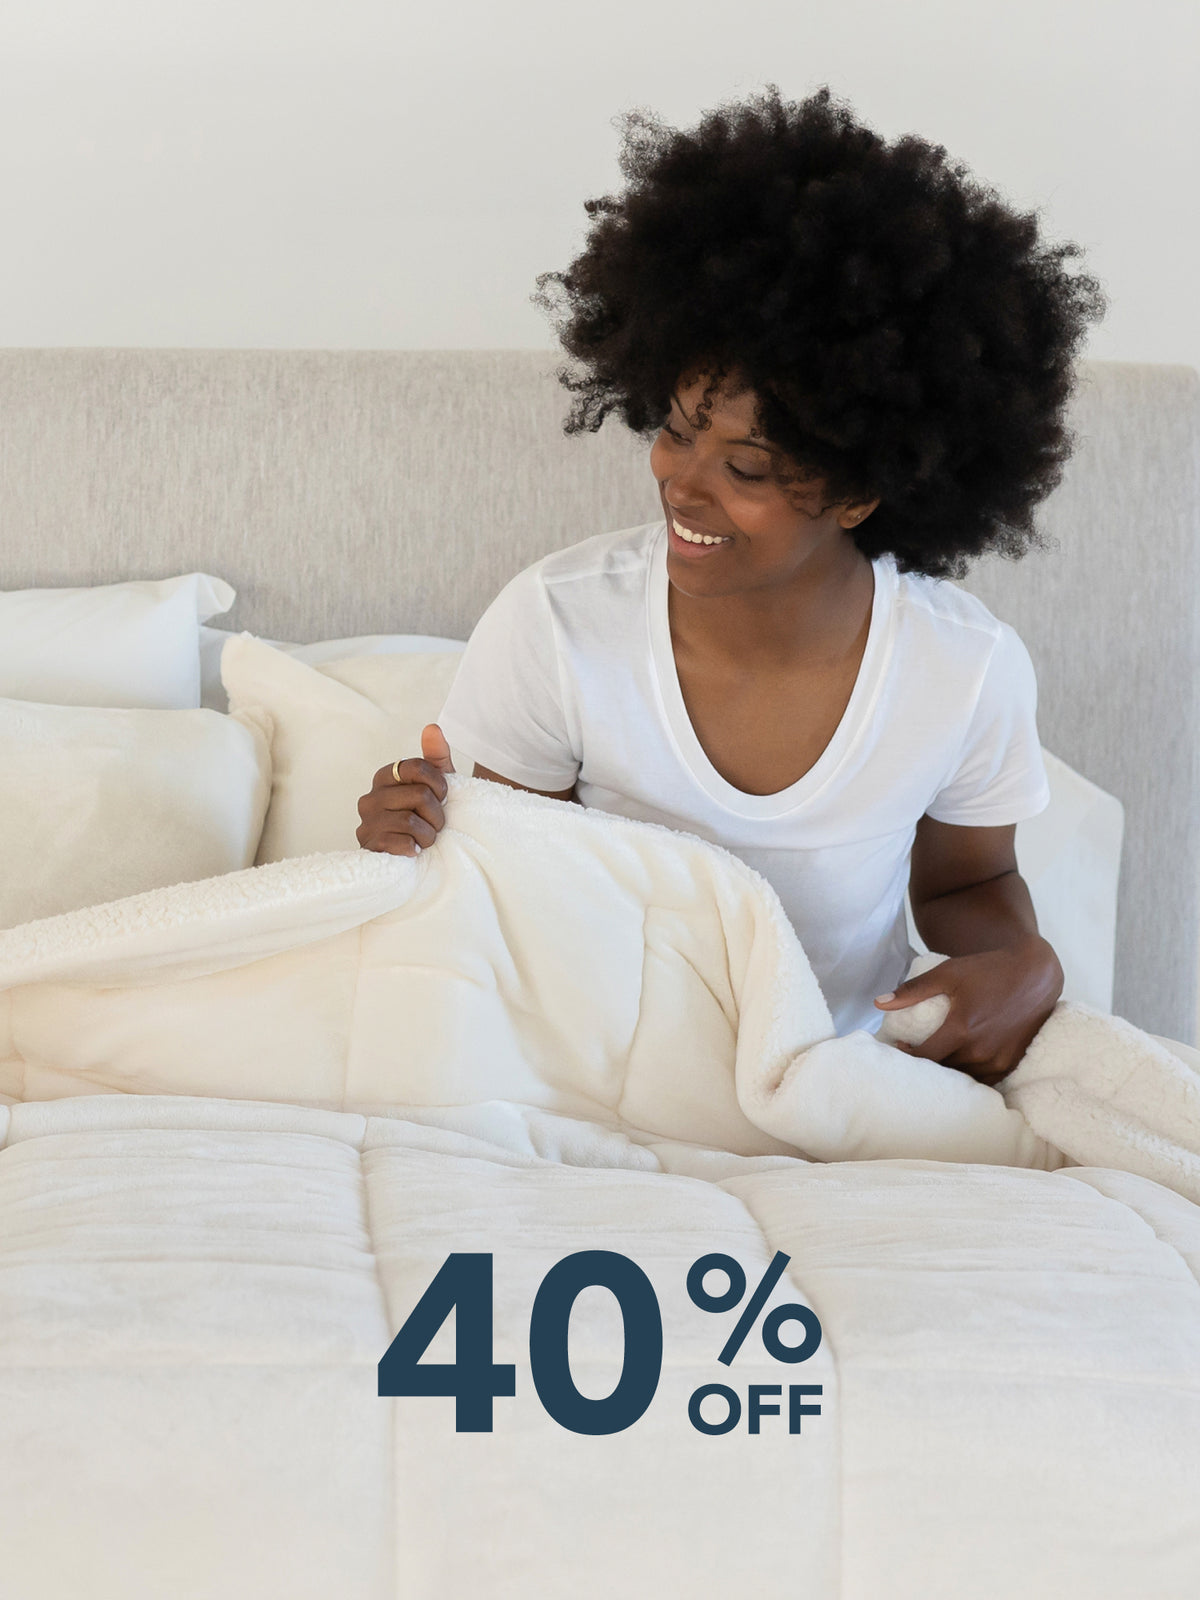 40% off bedding collection image featuring our Reversible VelvetLoft Sherpa Comforter Set!